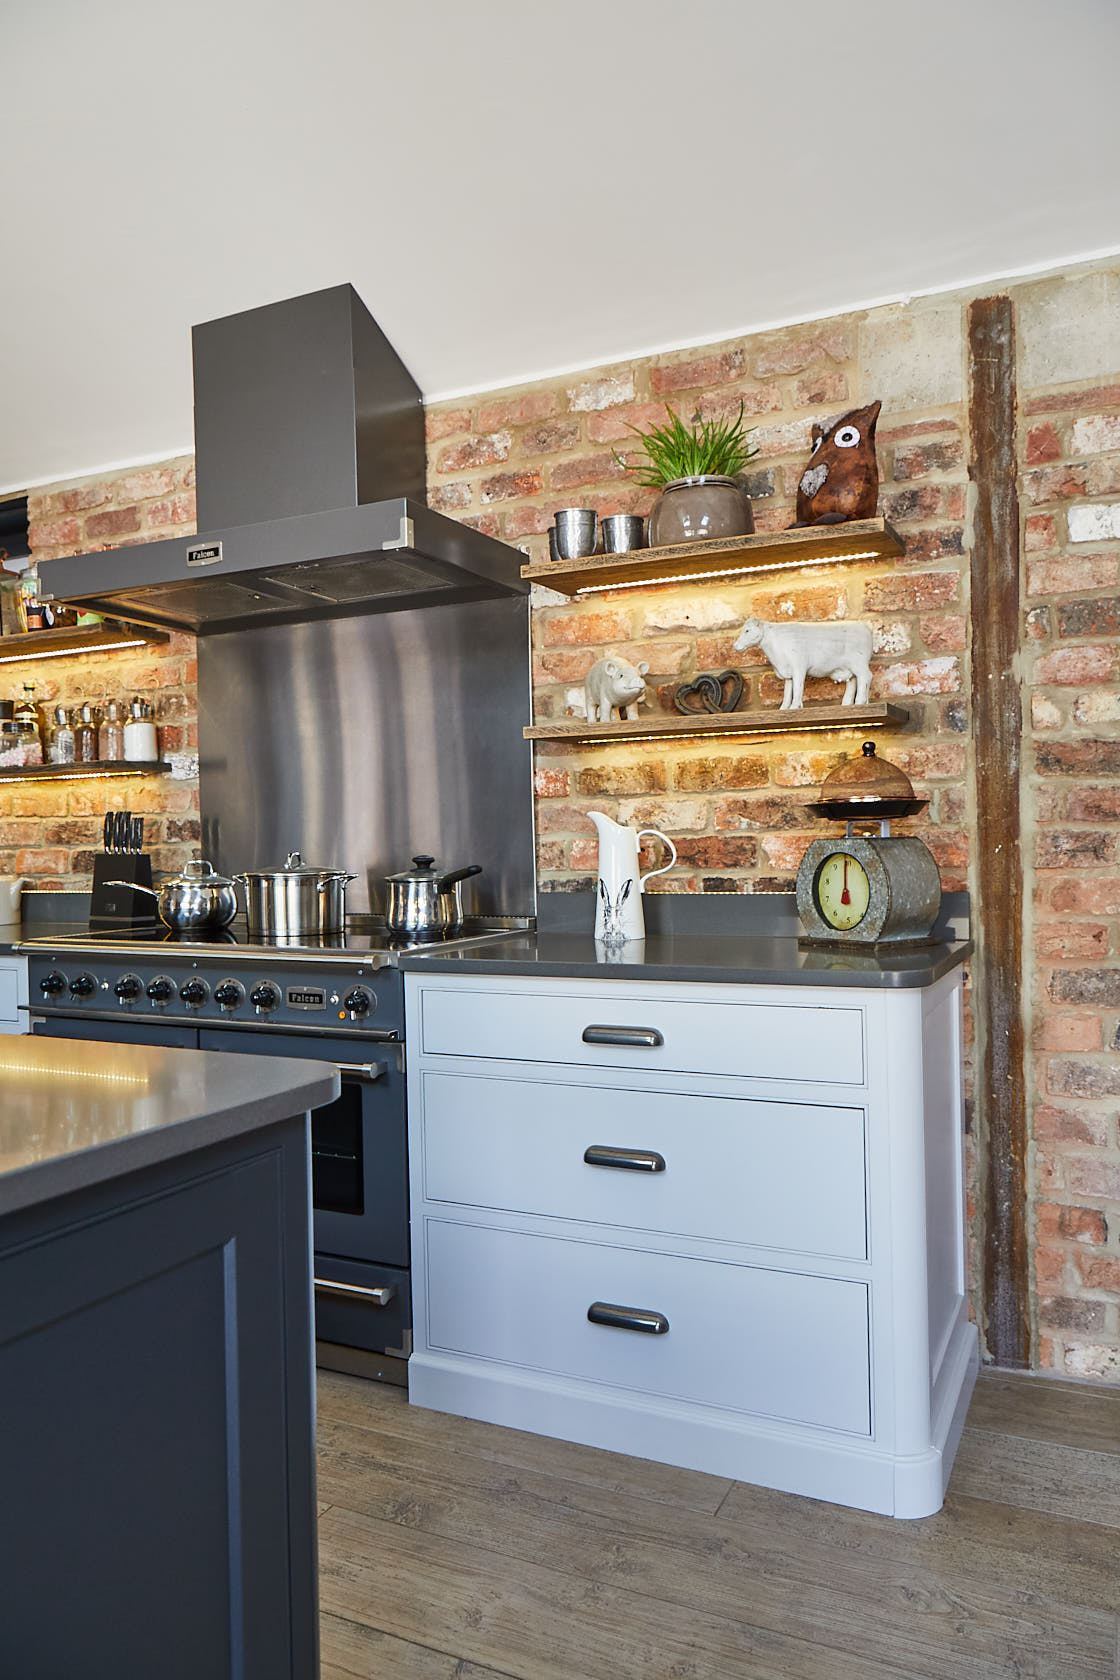 Grey range cooker with stainless steel extractor against exposed brick wall